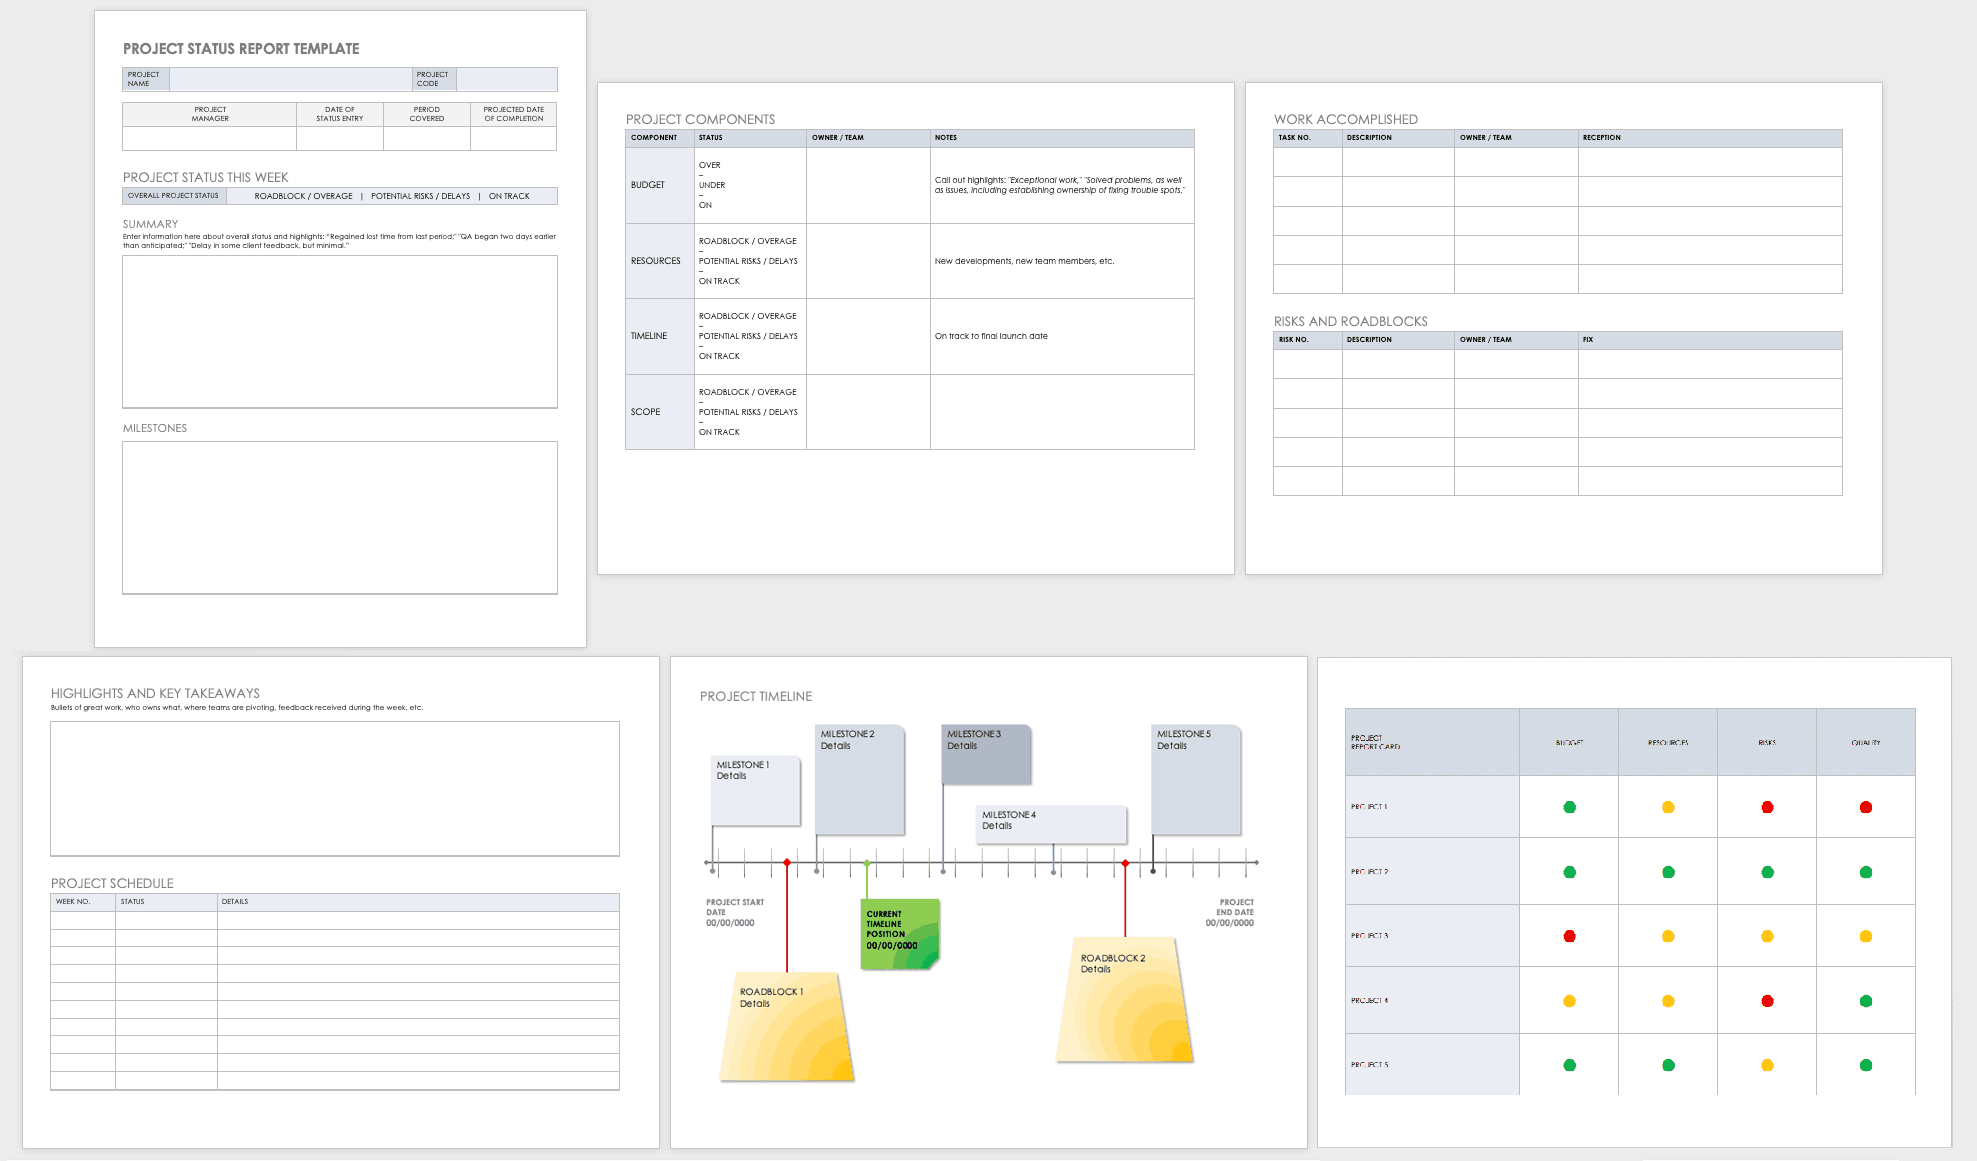 Free Project Report Templates | Smartsheet With Regard To Executive Summary Project Status Report Template